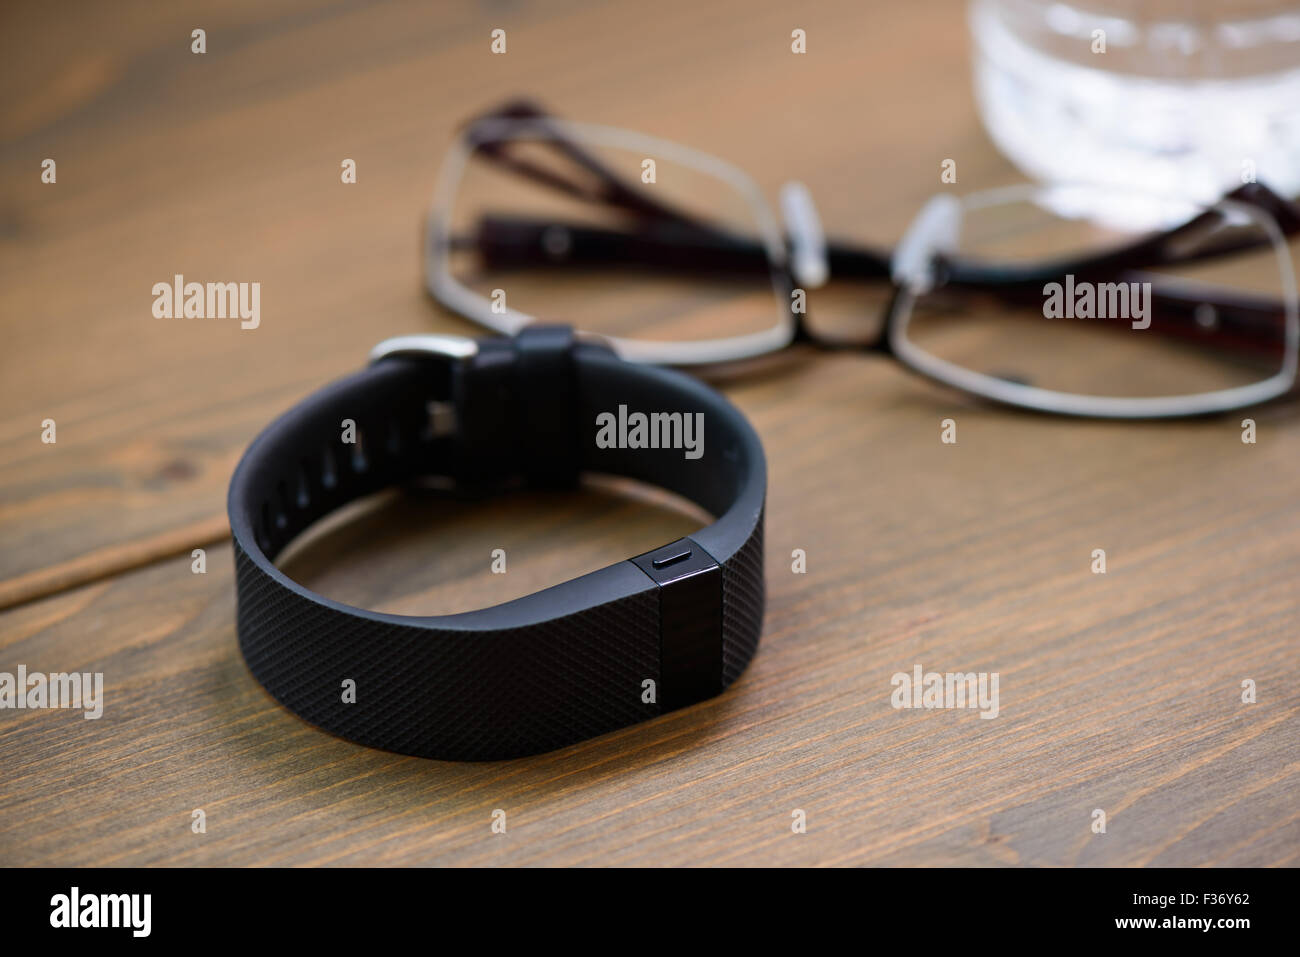 wearable device, wirst watch type Sports tracker and other objects on a wooden board Stock Photo